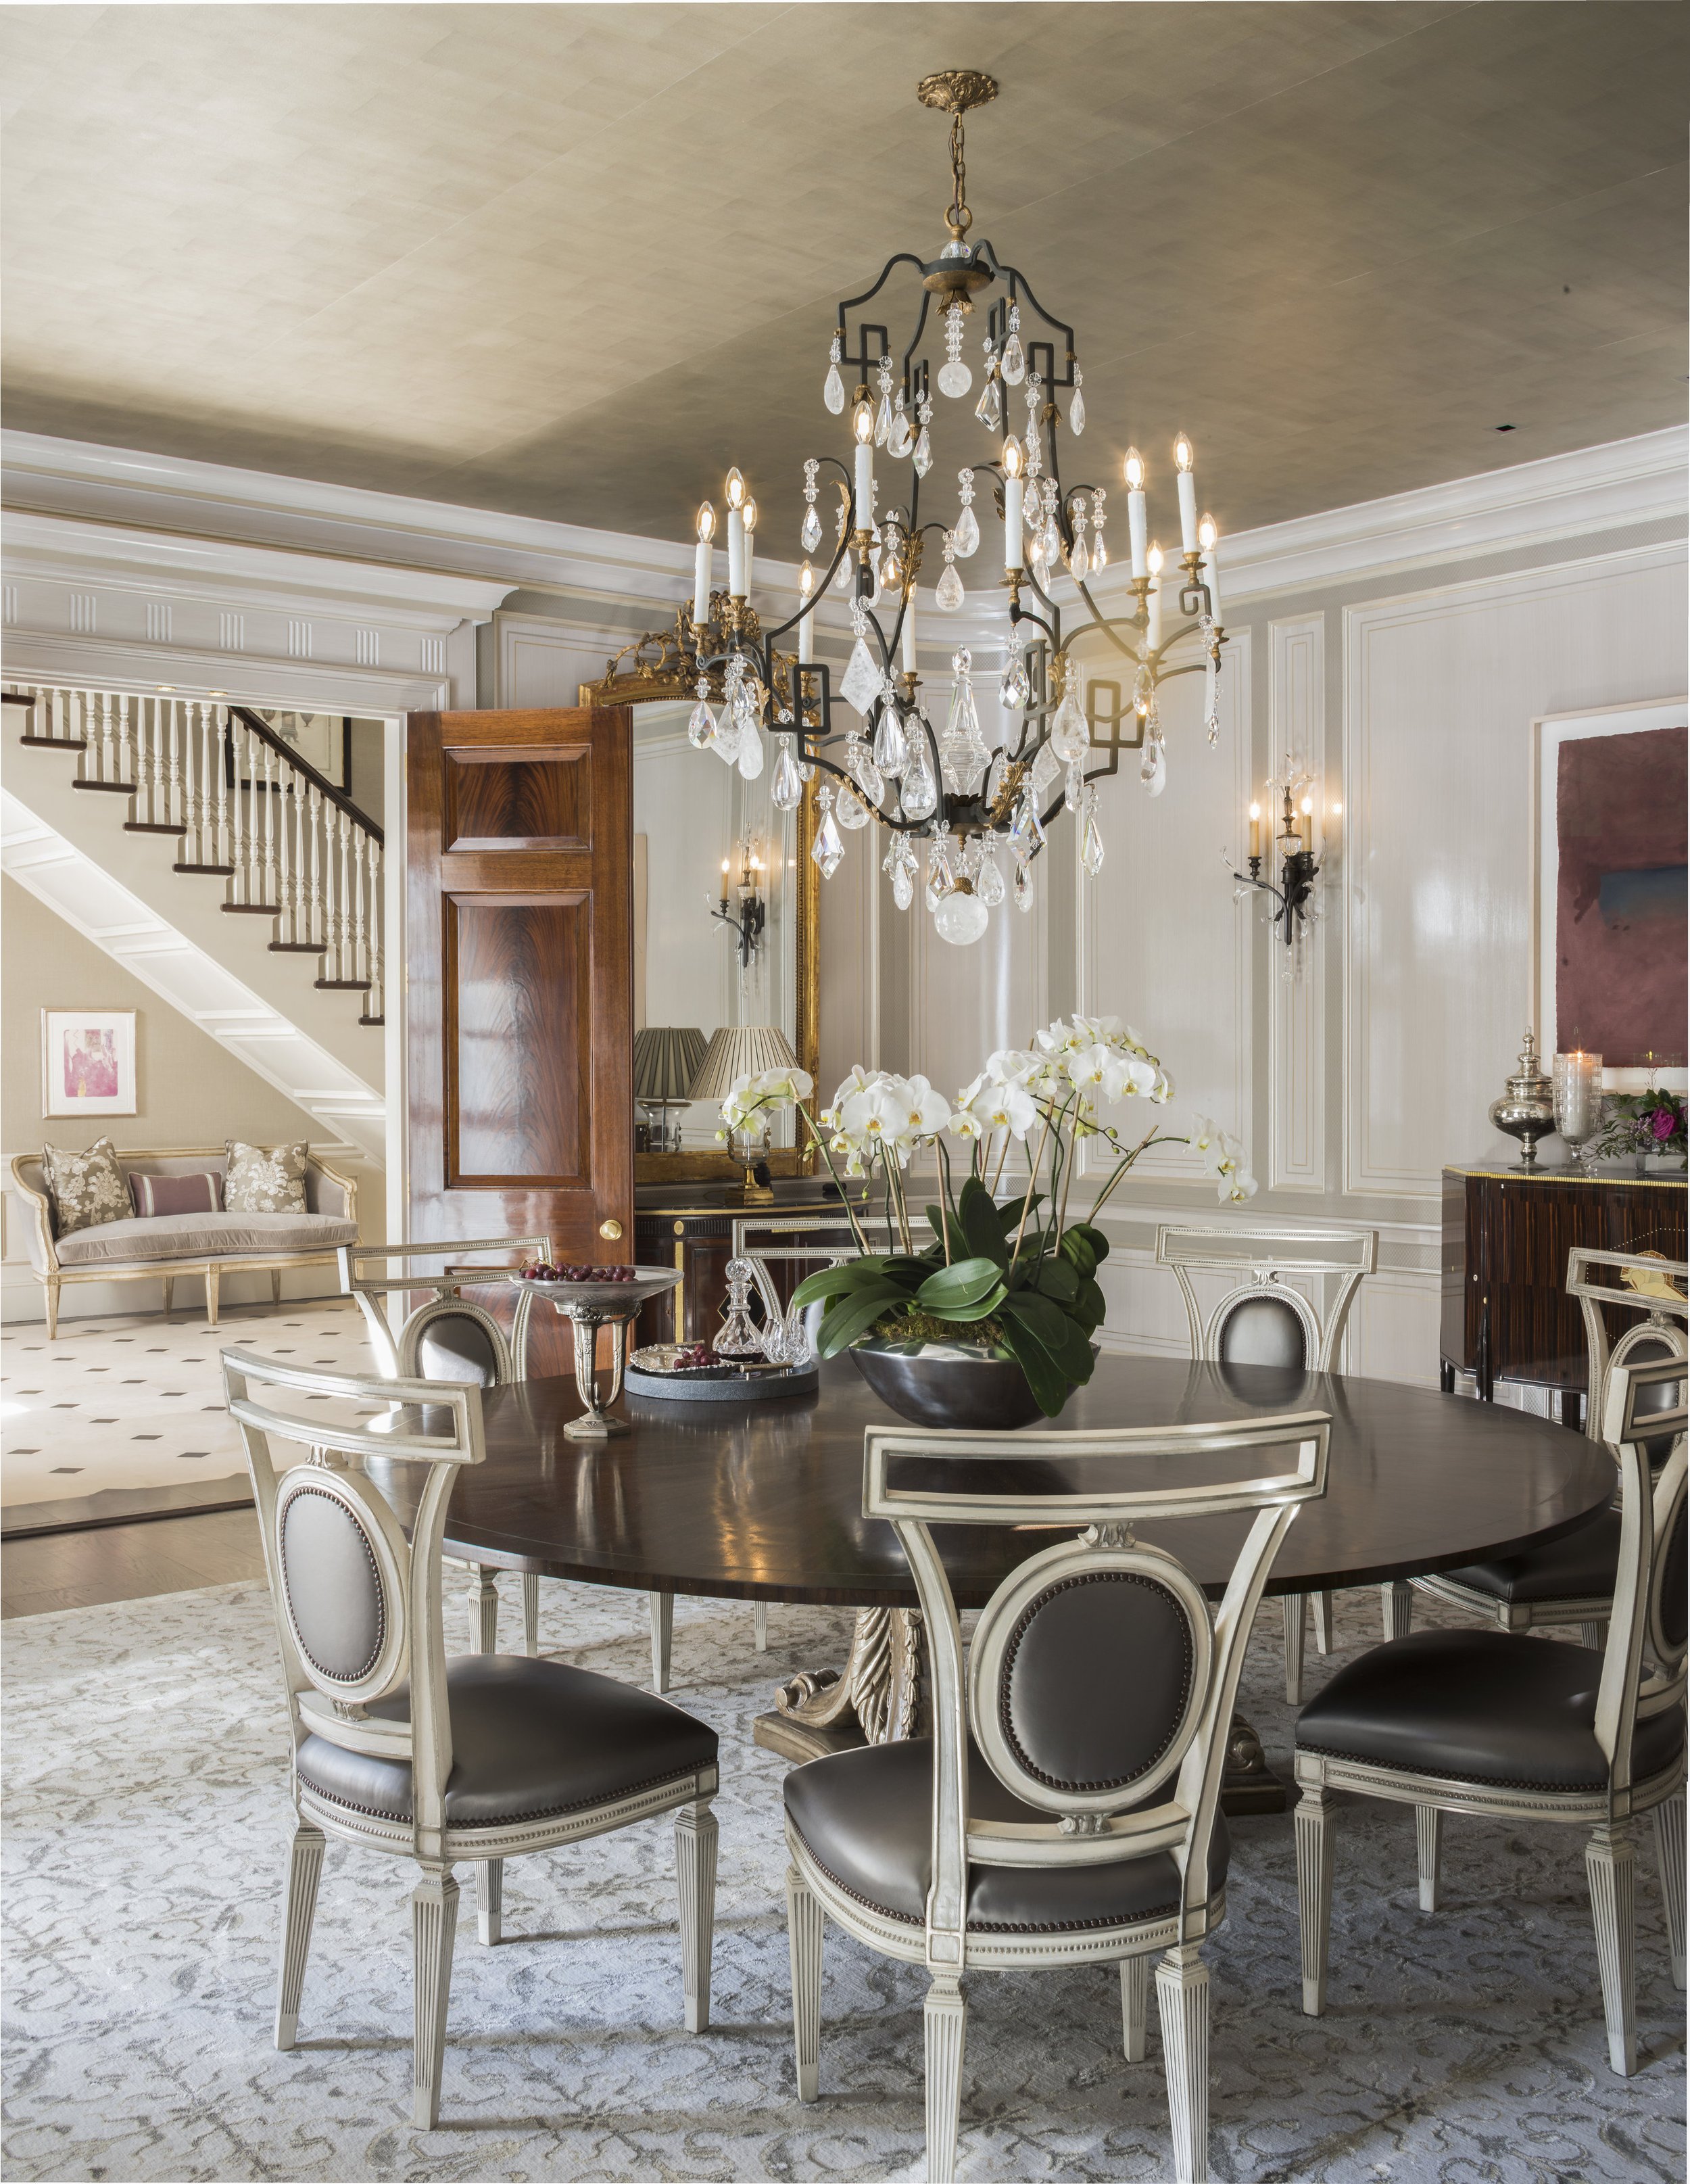 6-dining-room-chandelier-romantic-wainscoting-timeless-neoclassical-greenwich-connecticut.JPG